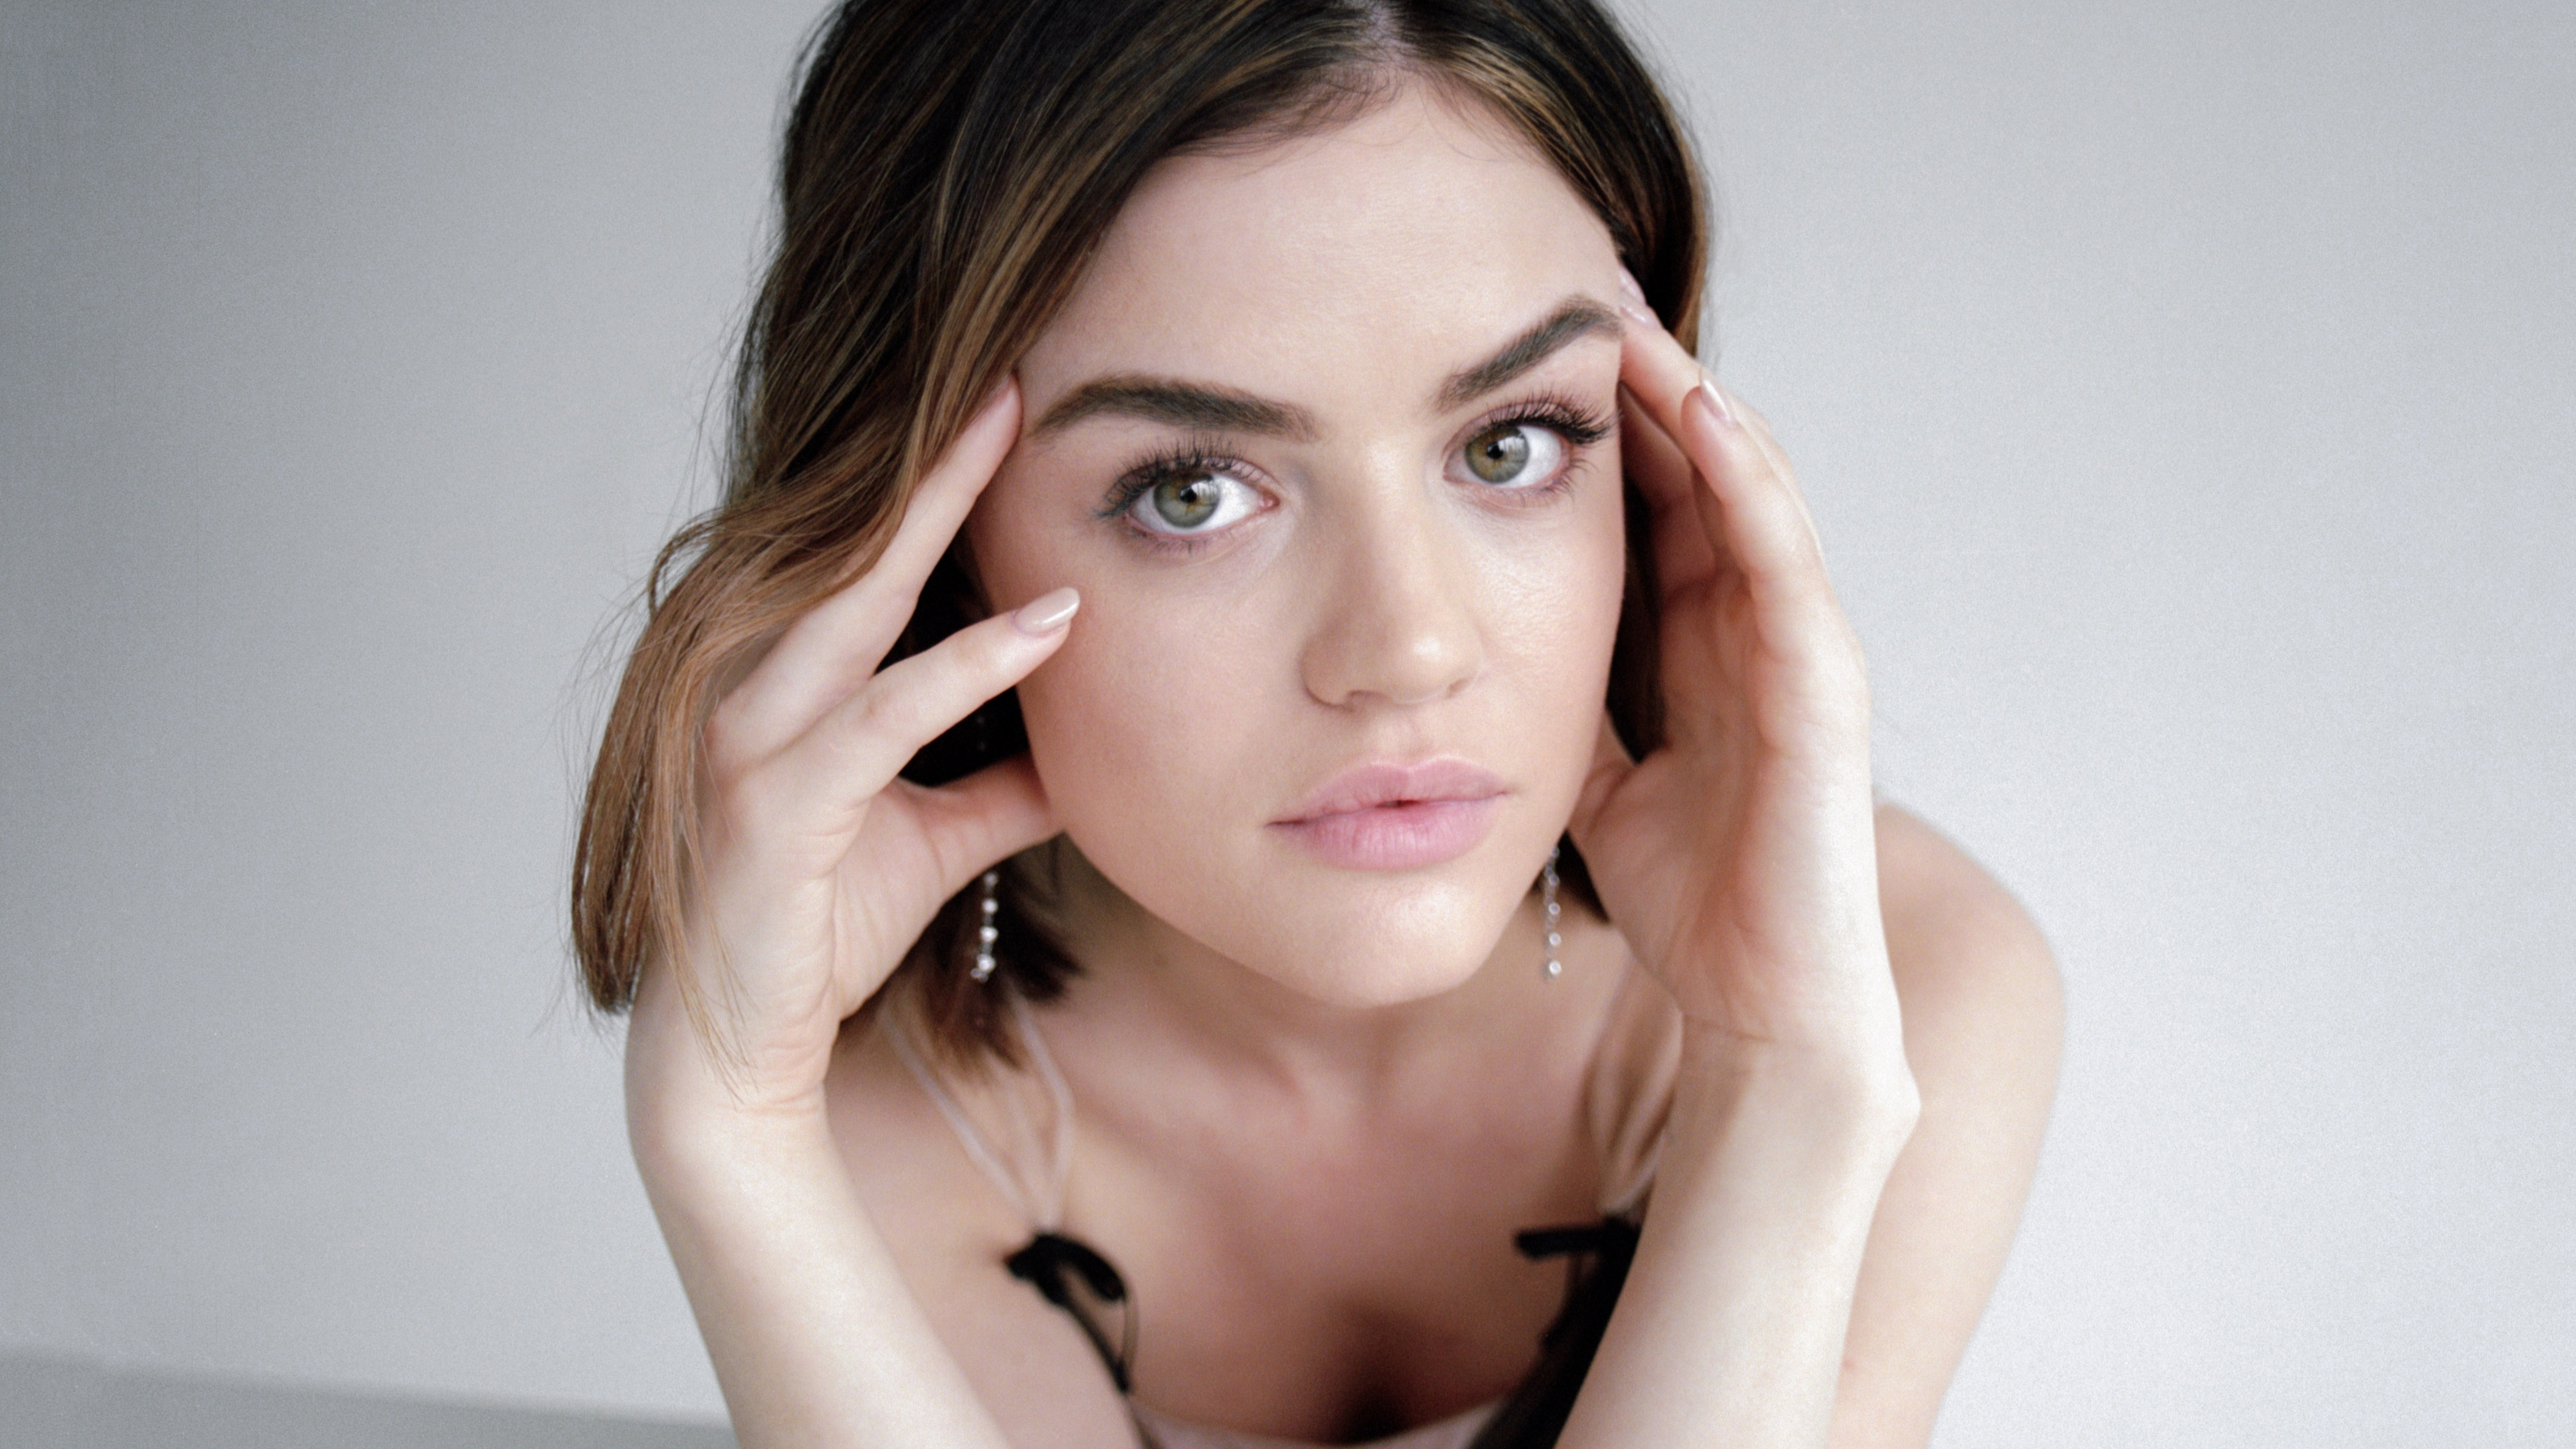 Wallpapers Lucy Hale pretty girl actress on the desktop